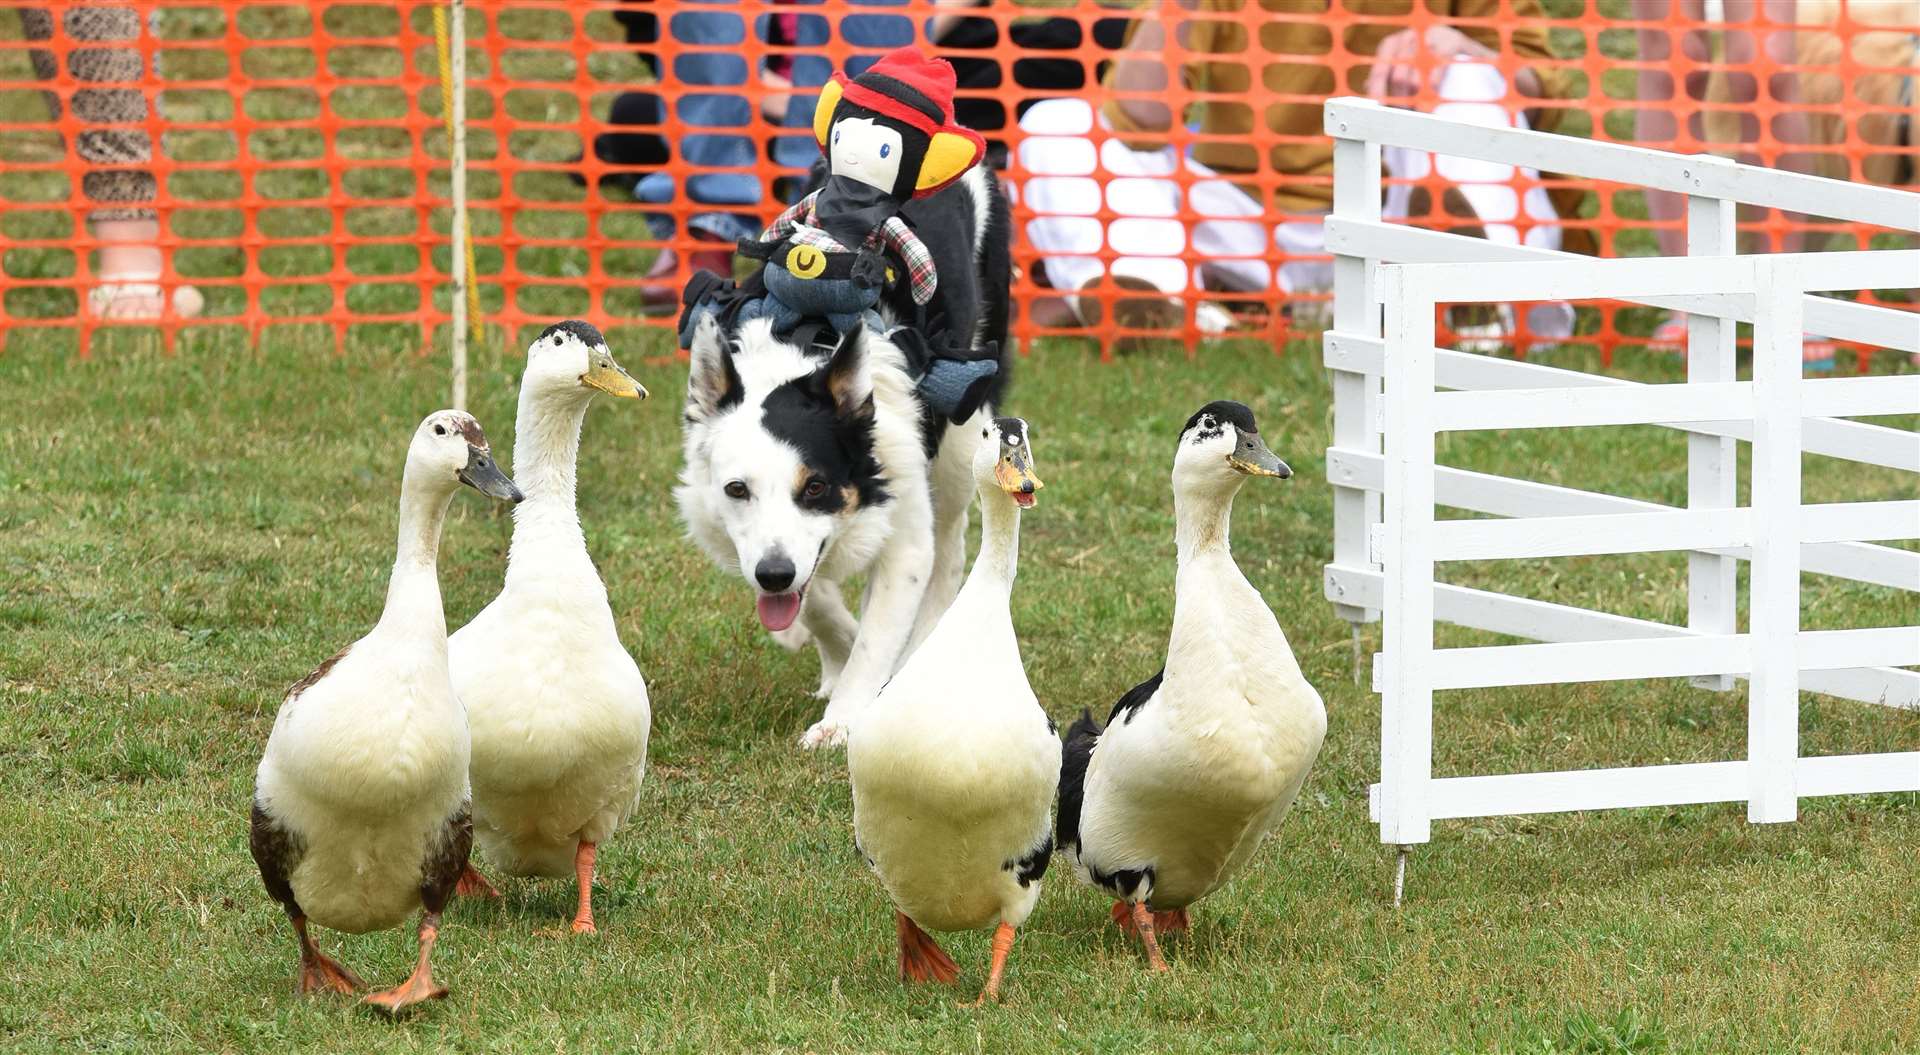 There will be a dog and duck show